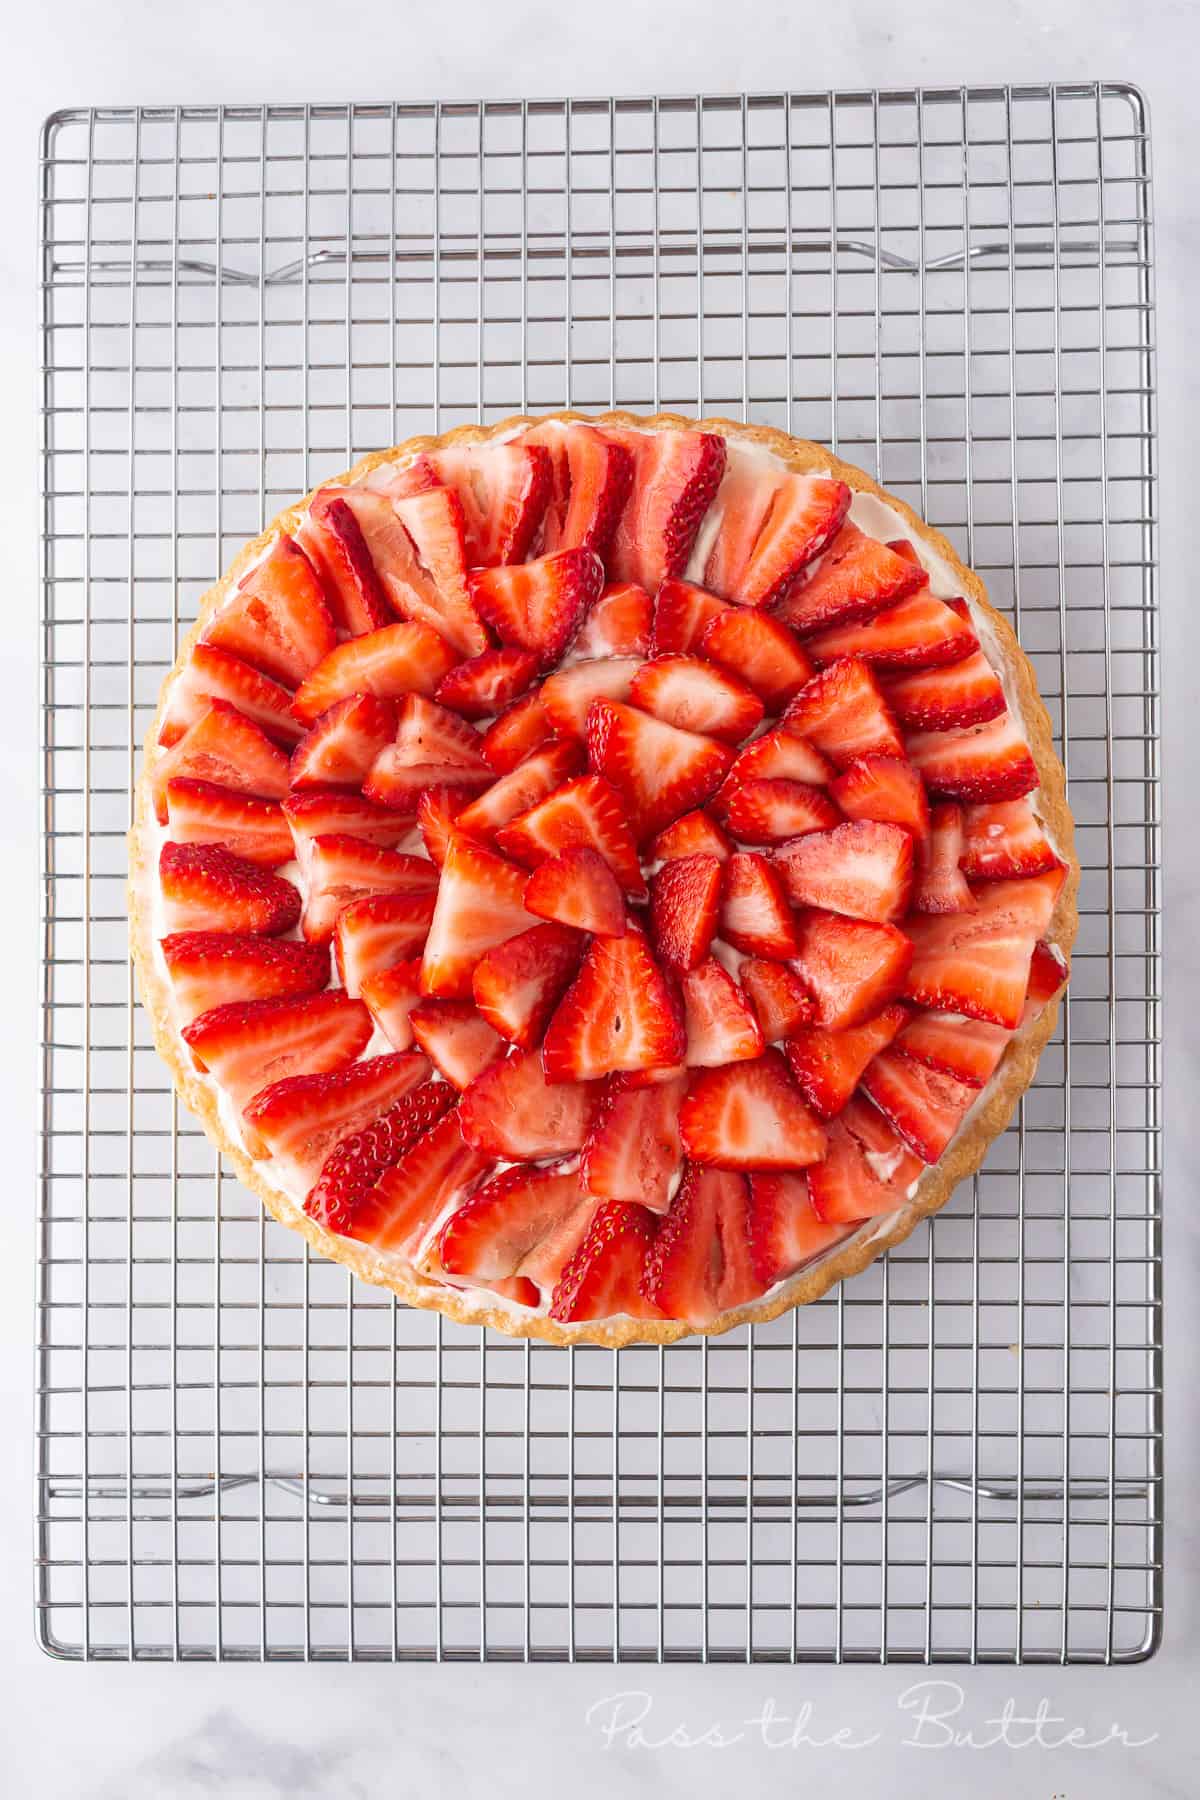 Place sliced strawberries on top